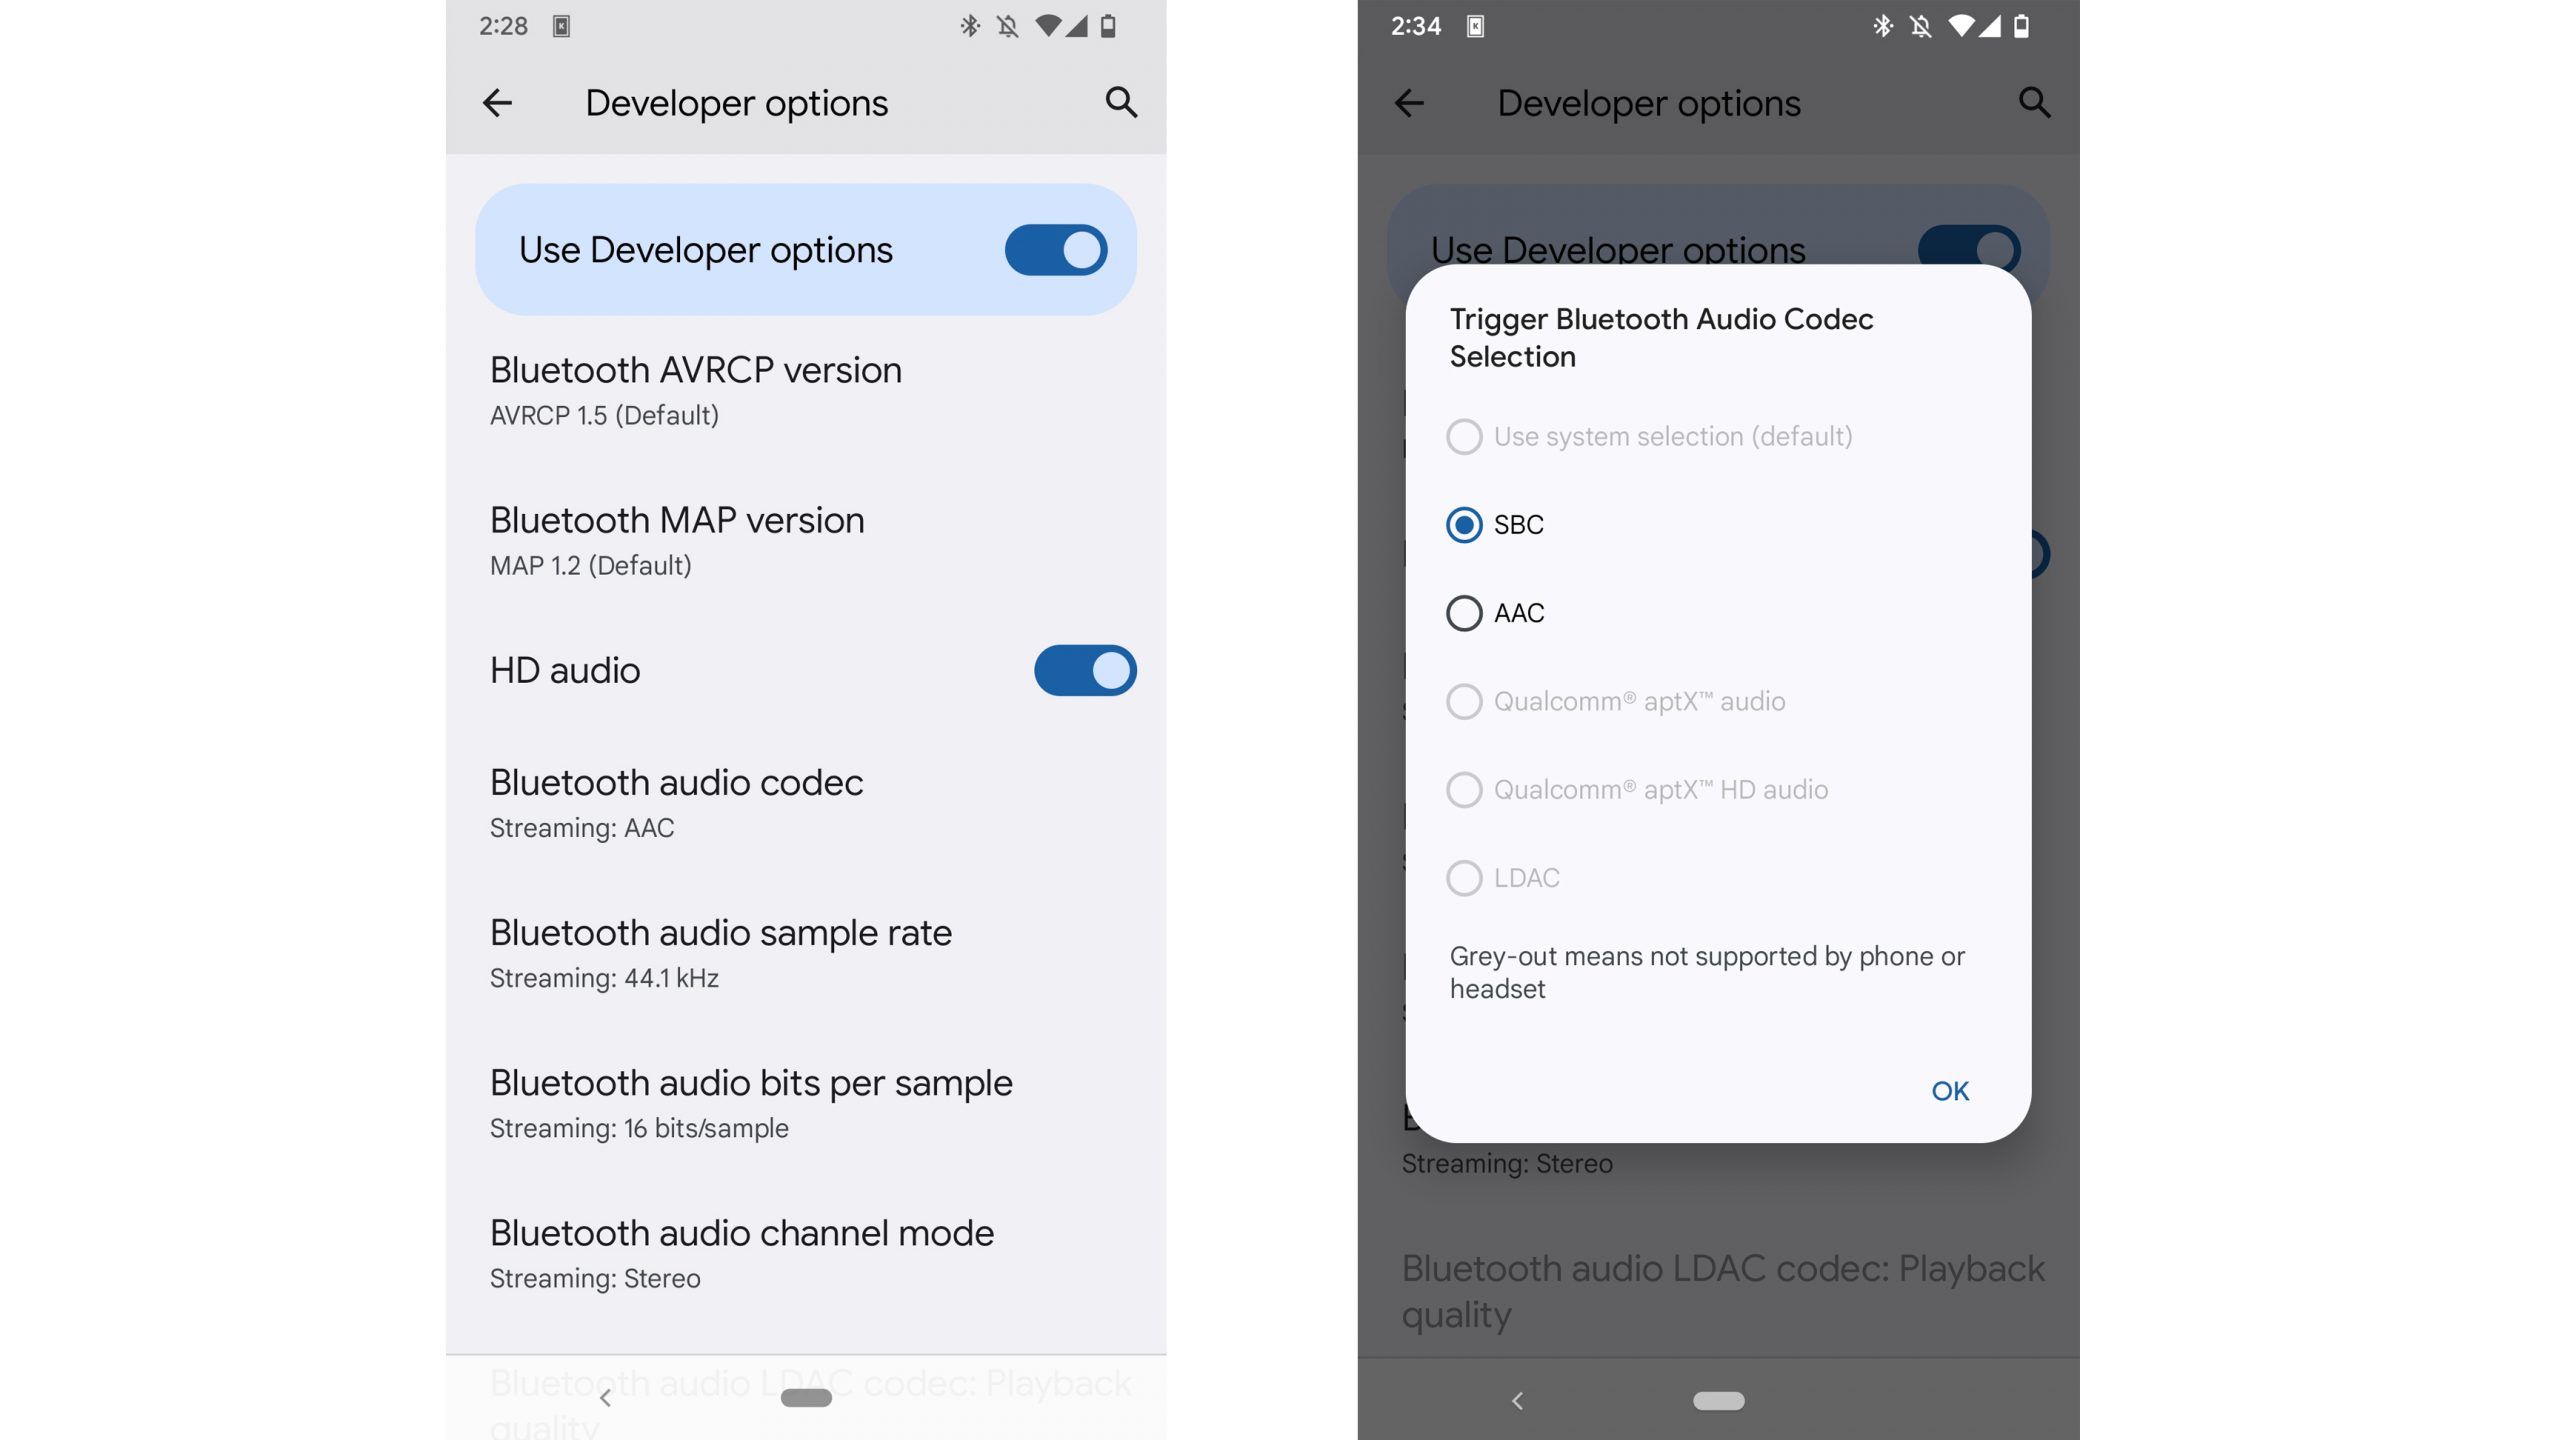 Two screenshots placed next to each other of an Android phone's settings screens. The left is the developer options menu, and the right is the Bluetooth codec selection menu where all options except SBC and AAC are grayed out. Left screenshot text transcription: Developer options. Use Developer options. Bluetooth AVRCP version. AVRCP 1.5 (Default). Bluetooth MAP version MAP 1.2 (Default). HD audio. Bluetooth audio codec. Streaming: AAC. Bluetooth audio sample rate Streaming: 44.1 kHz. Bluetooth audio bits per sample Streaming: 16 bits/sample. Bluetooth audio channel mode Streaming: Stereo. Bluetooth audio LAC codec: Playback quality. Right screenshot text transcription: Developer options. Use Developer options. Trigger Bluetooth Audio Codec Selection. Use system selection (default). SBC. AAC. Qualcomm® aptX&quot; audio. Qualcomm® aptX&quot; HD audio. LDAC. Grey-out means not supported by phone or headset. Ok.